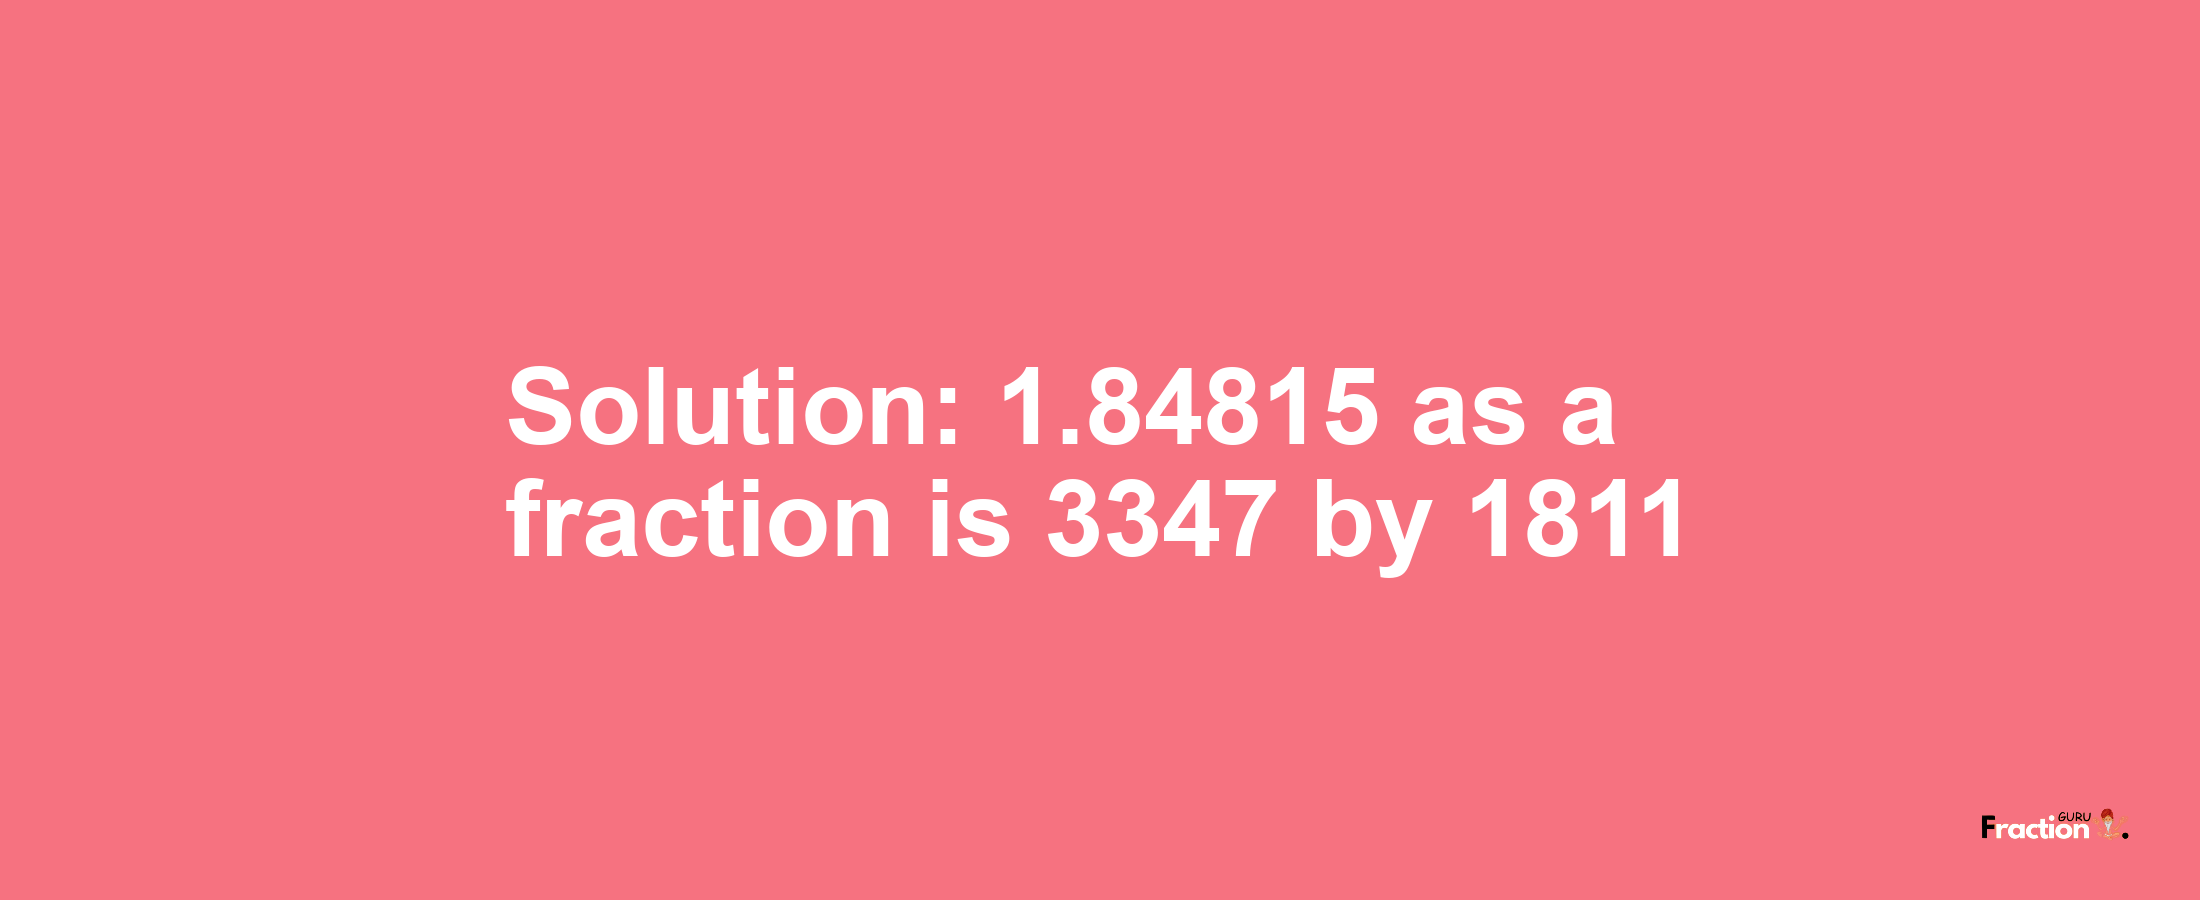 Solution:1.84815 as a fraction is 3347/1811